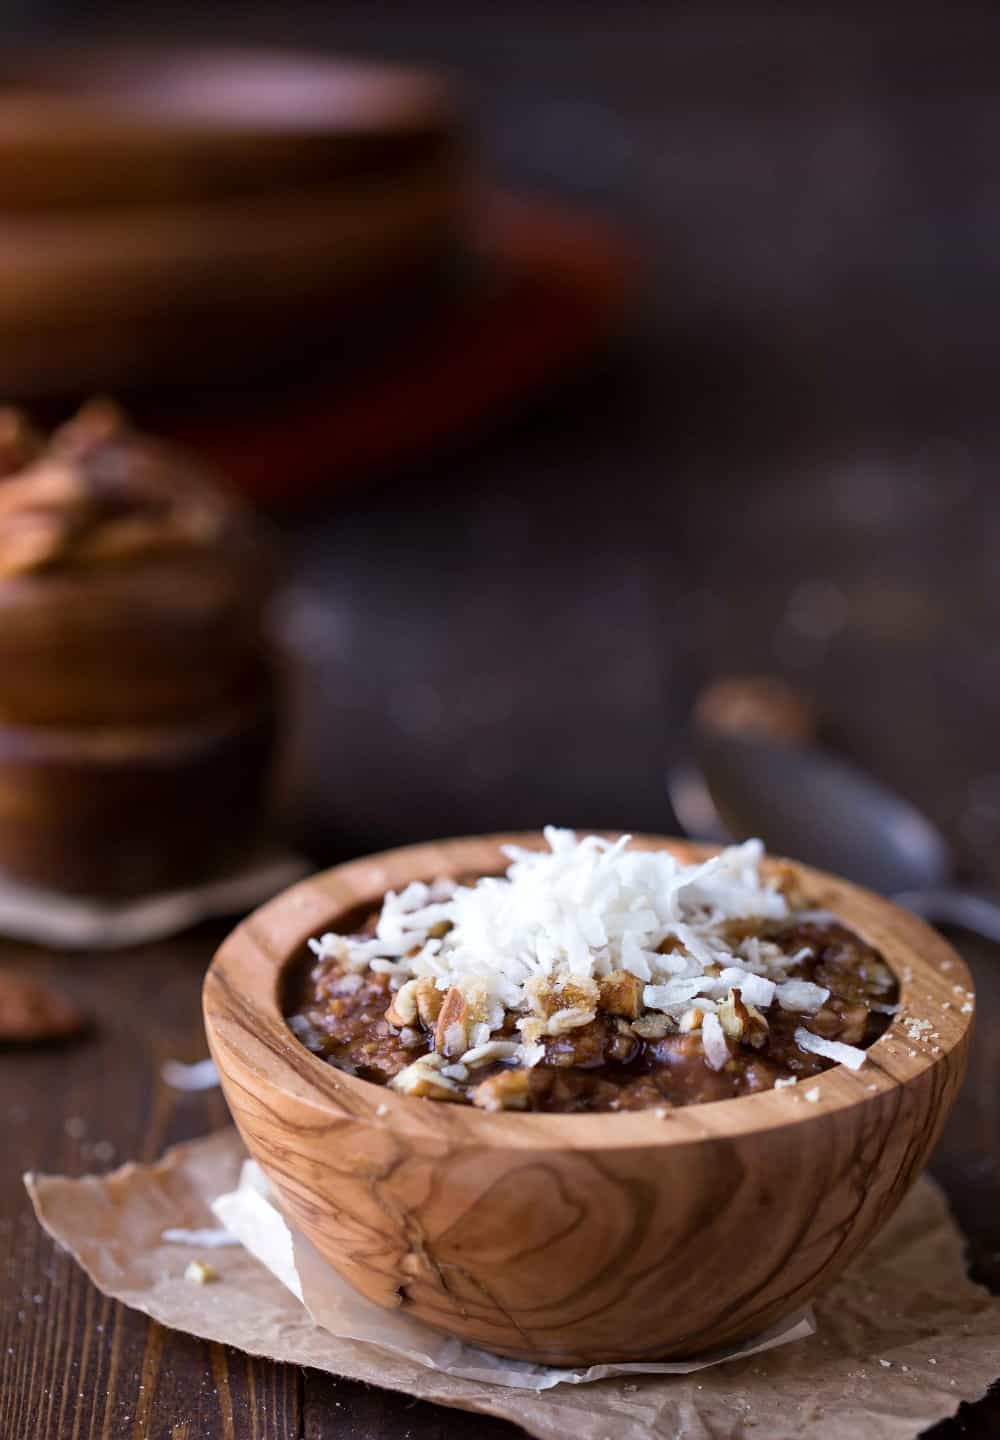 Crock Pot German Chocolate Oatmeal topped with coconut in a wooden bowl